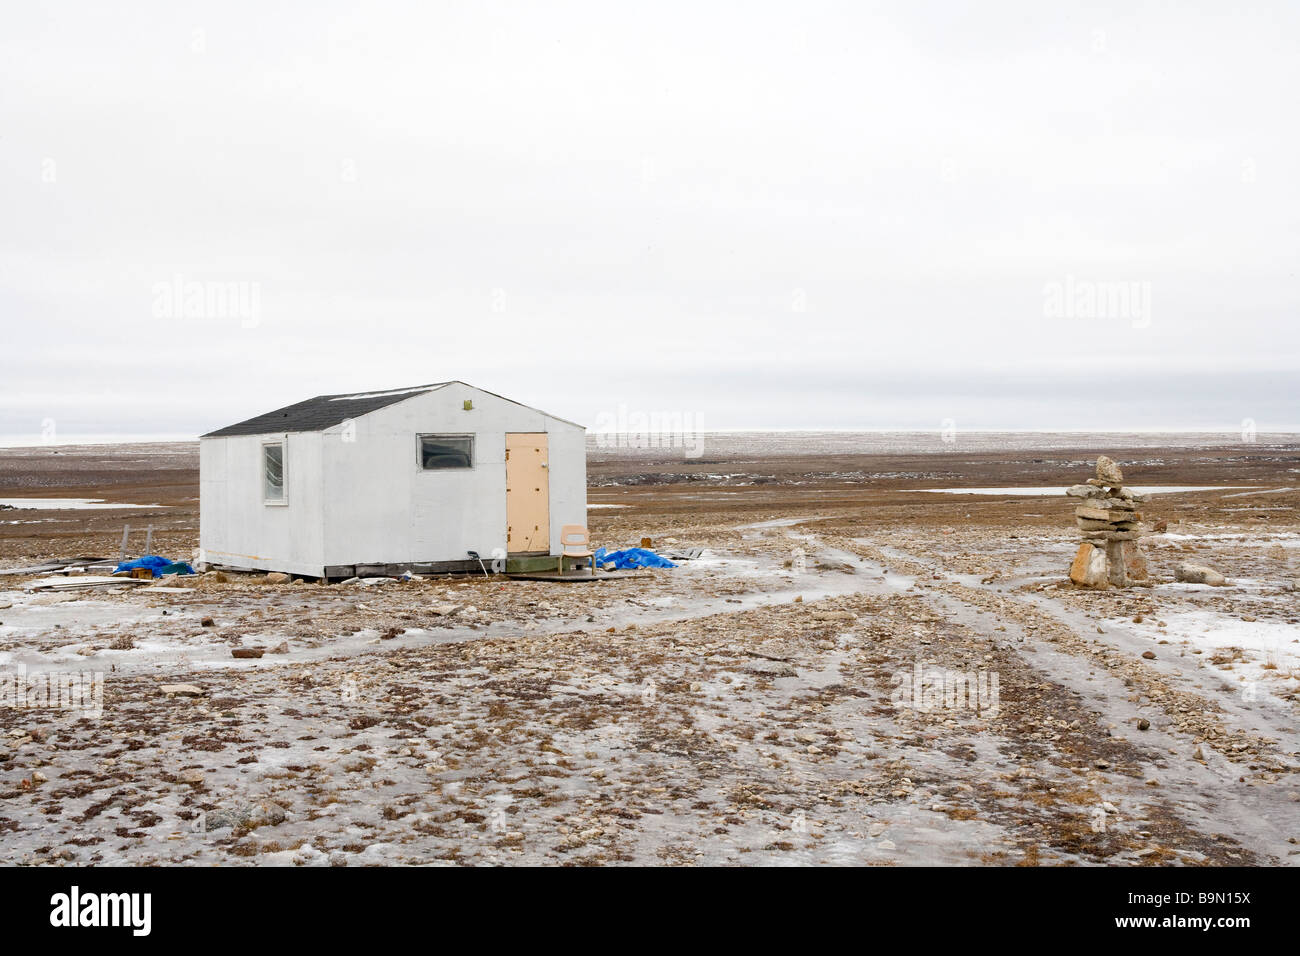 Unfinished shed building in coastal landscape, Canadian arctic, Canada Stock Photo